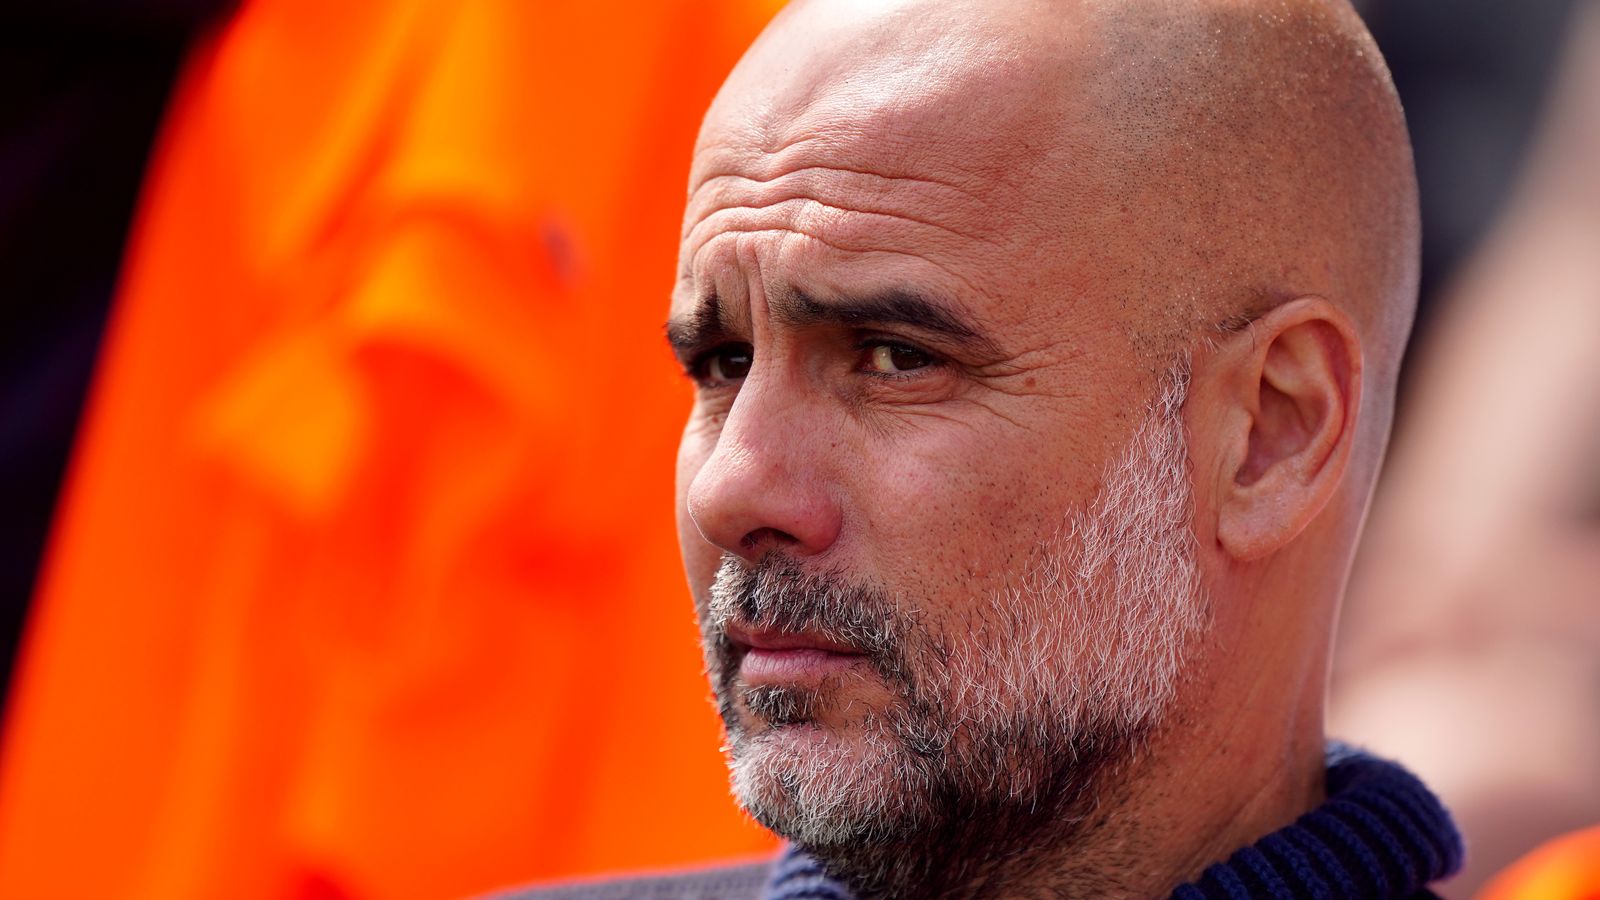 Manchester City manager Pep Guardiola says Spurs would be 'offended' by claim they don't want to win crucial match - Sky News